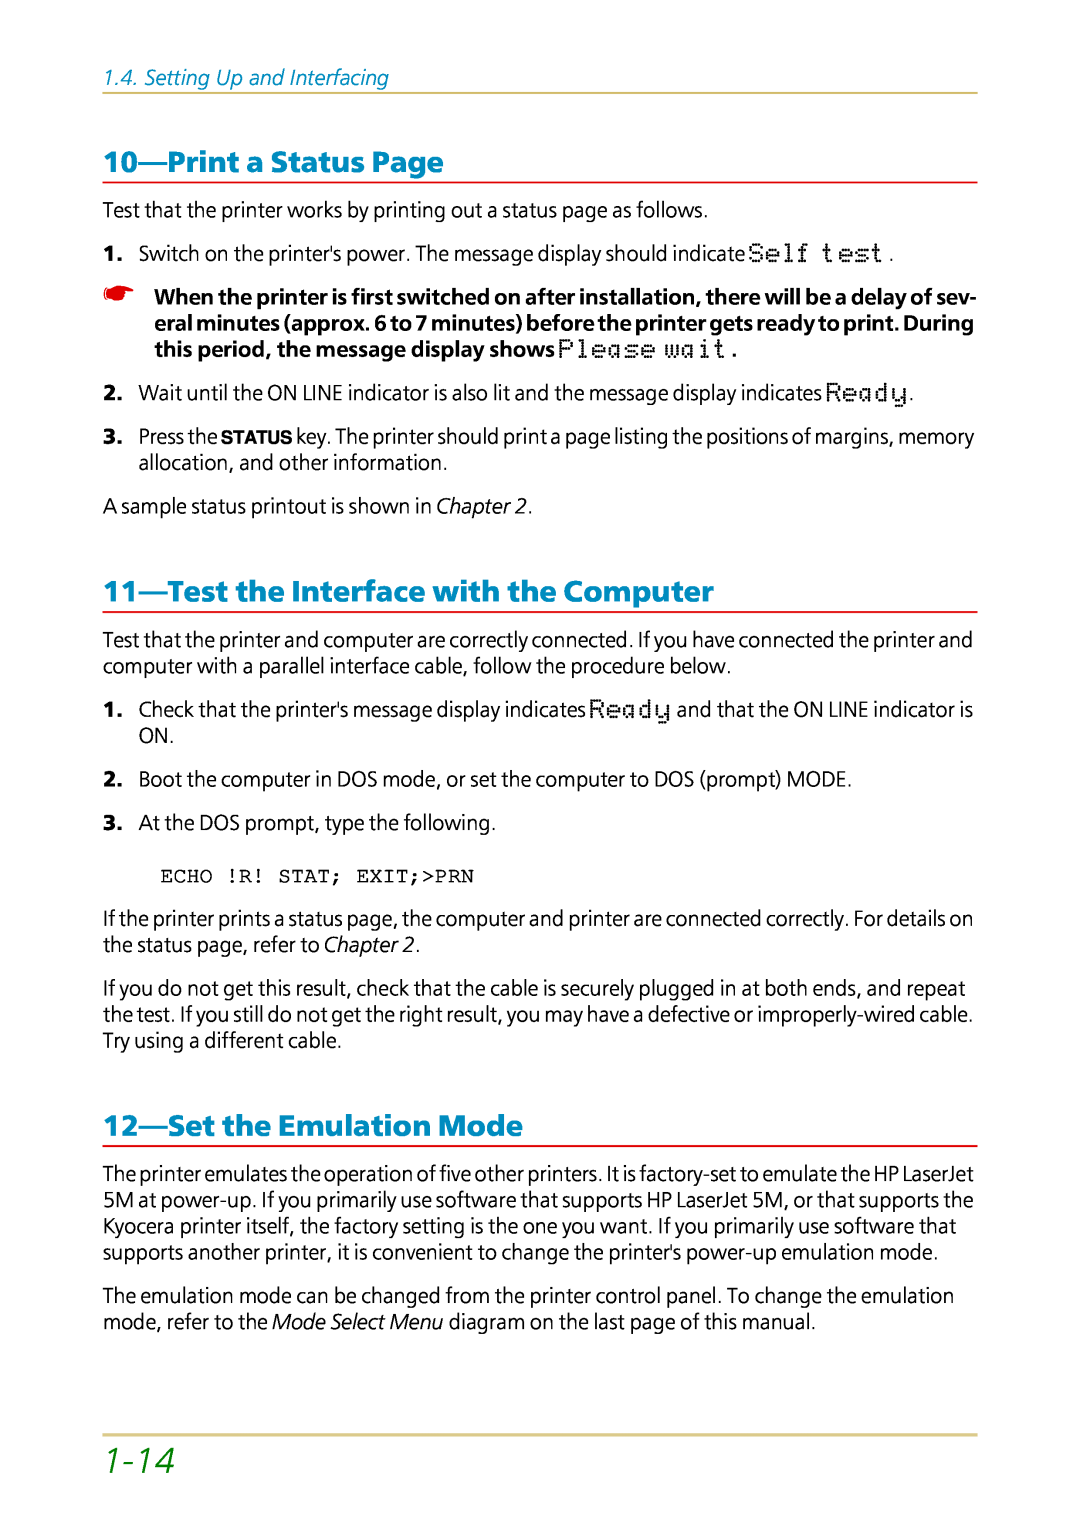 Kyocera FS-1700 user manual 1-14, Printa Status Page, 11—Testthe Interface with the Computer, Setthe Emulation Mode 